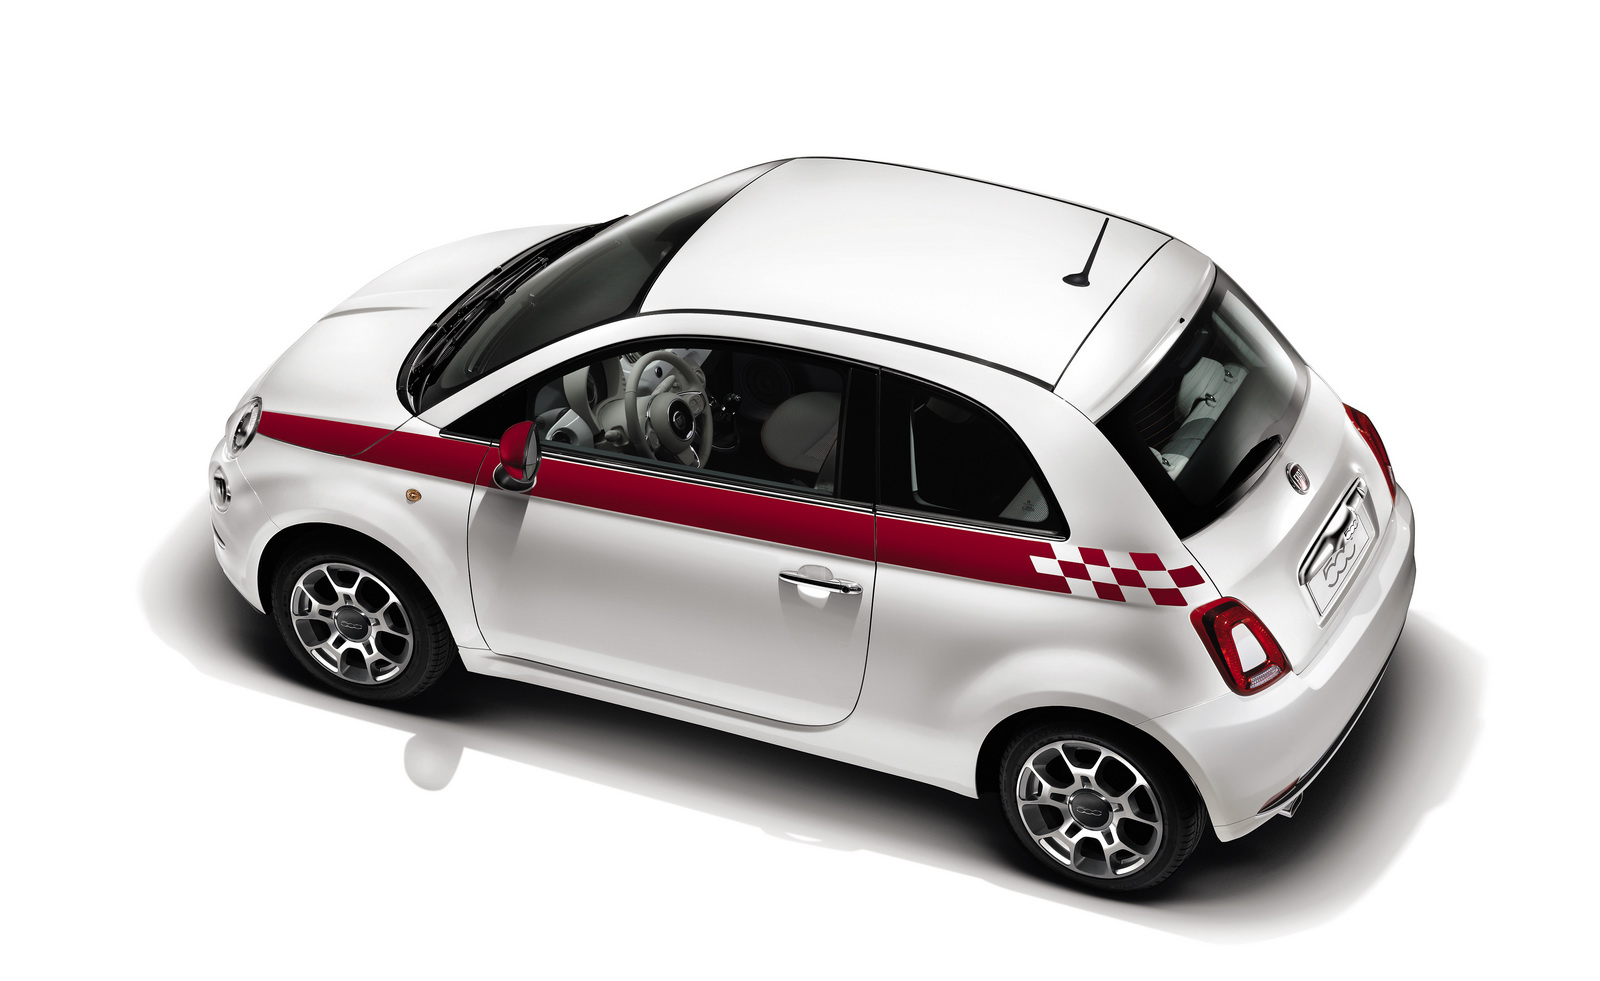 Mopar Is Quick To Announce Tuning Bits For Facelifted Fiat 500 | Carscoops